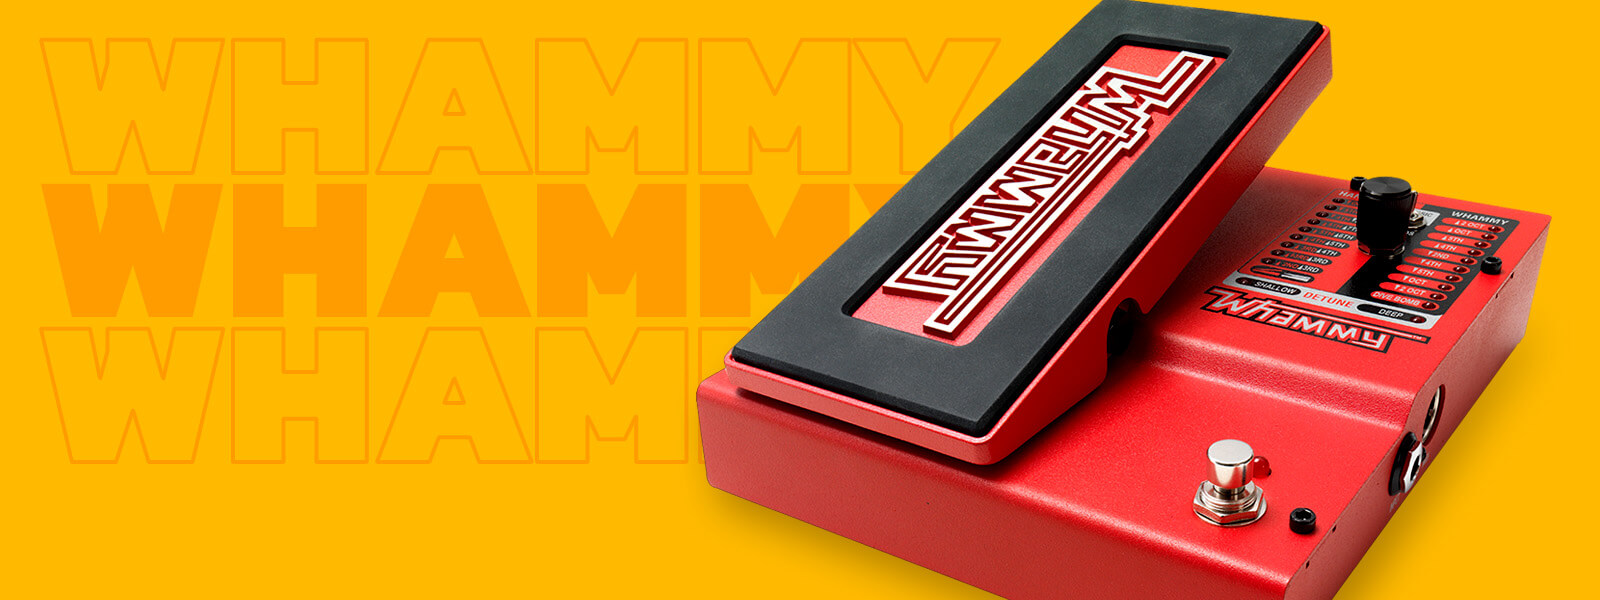 DigiTech Whammy pitch-shift effect with true bypass guitar pedal in red with yellow graphics background that says whammy